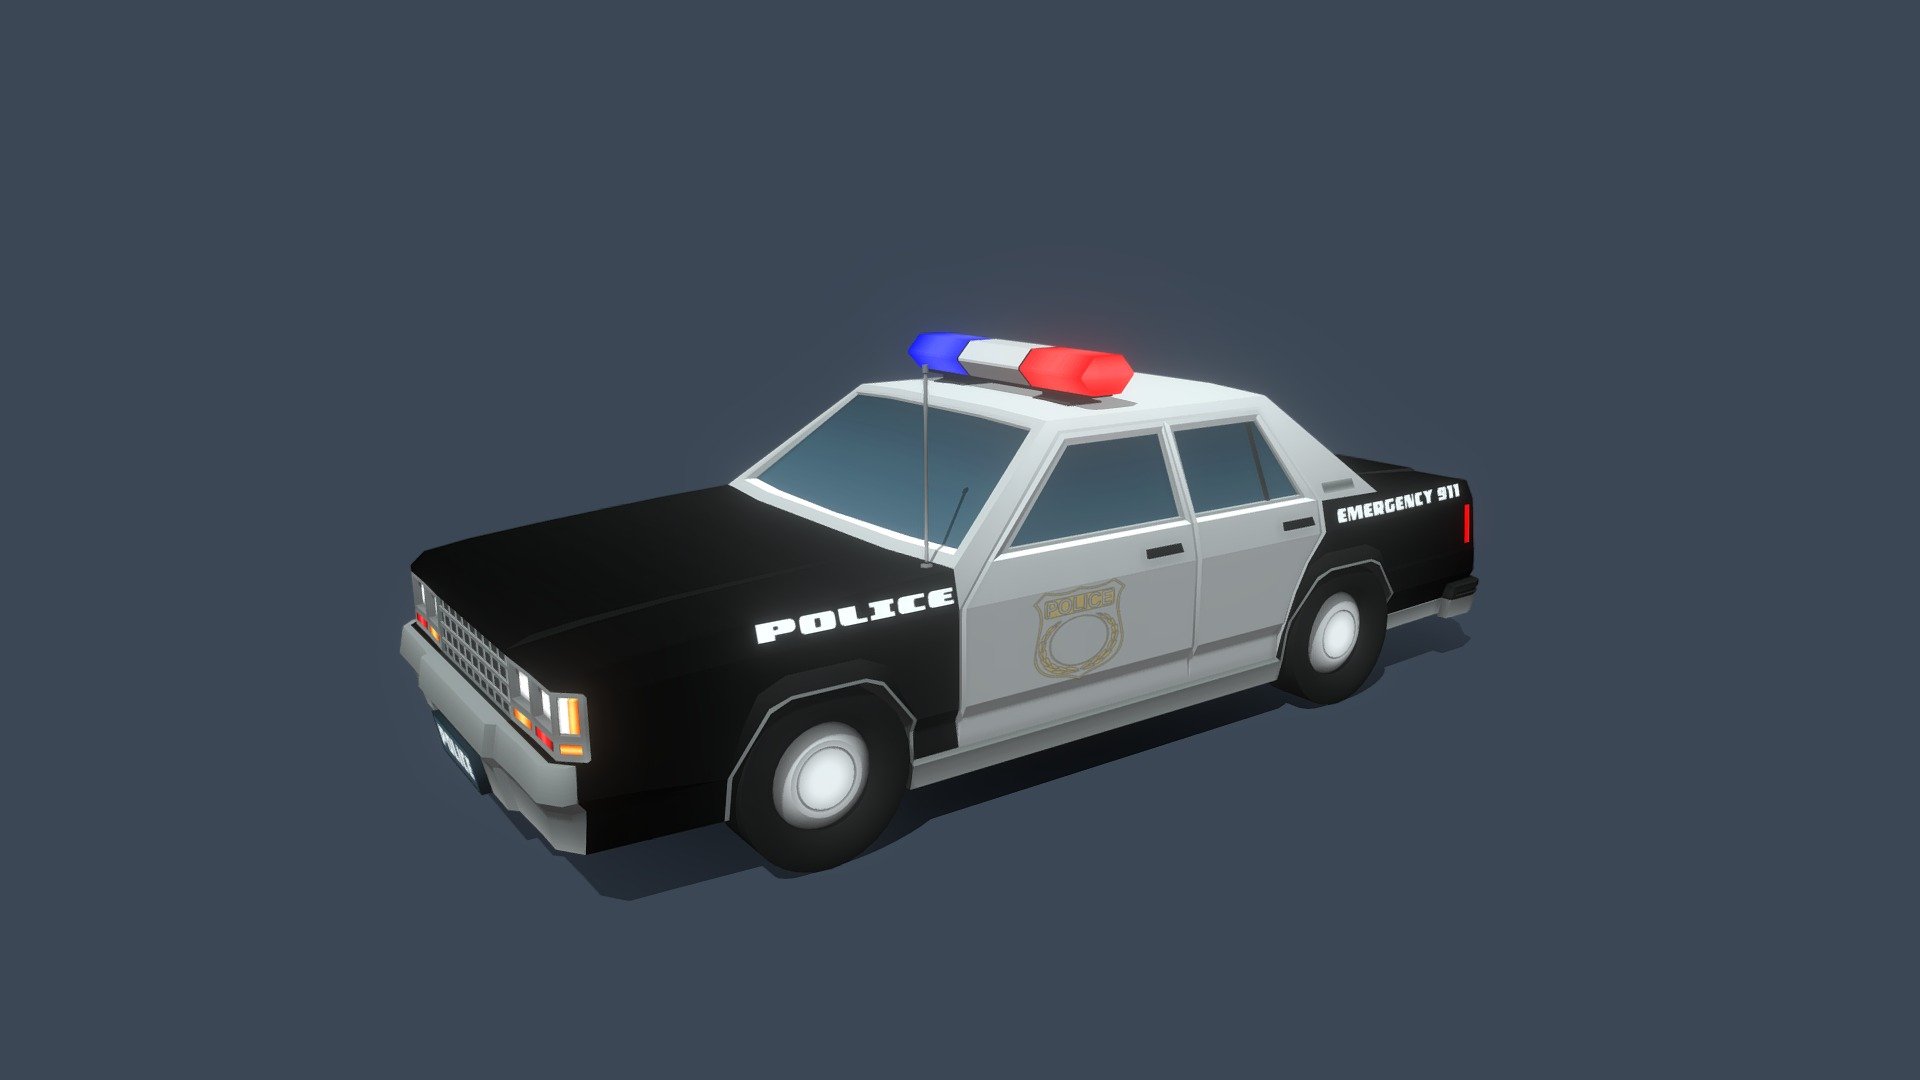 Made for a Quacky Drive mobile game prototype - Stylized low poly police car - 3D model by reizer 3d model